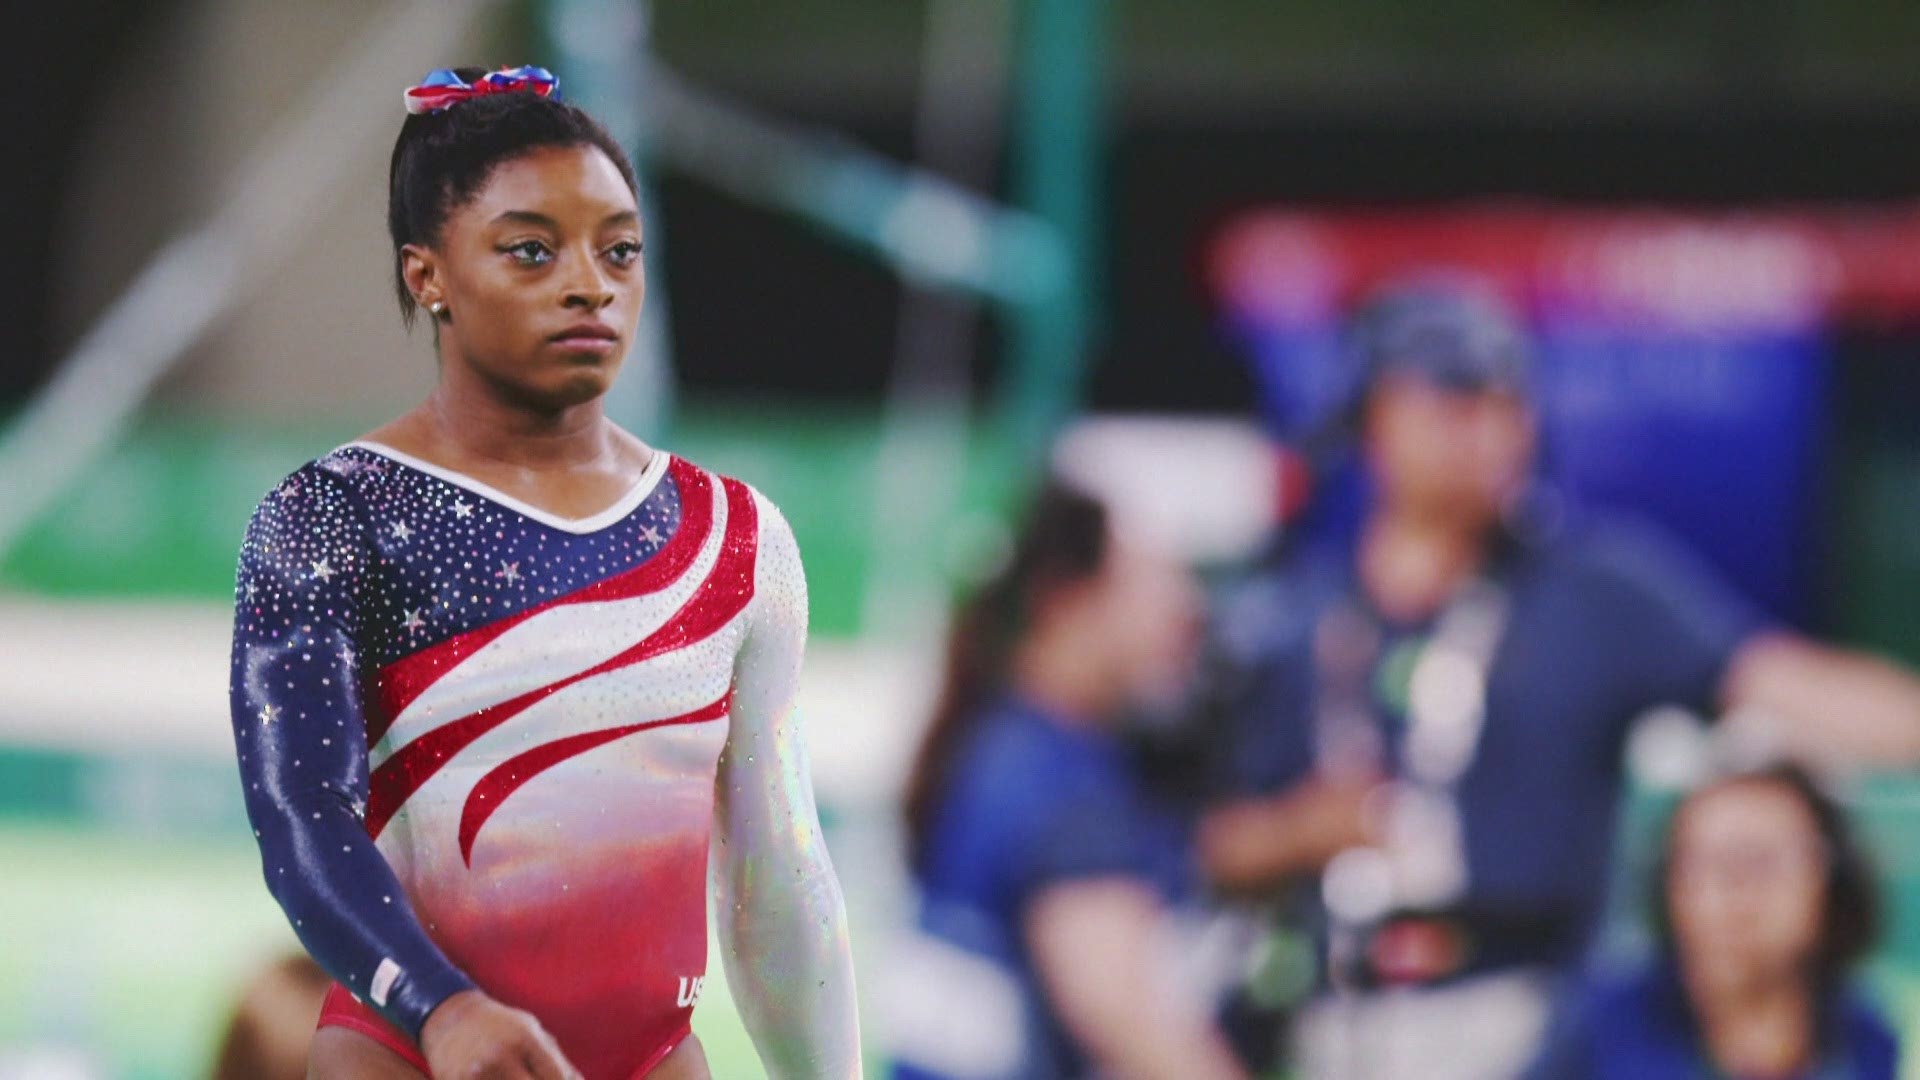 Simone Biles, the biggest name on Team USA, will be one of the biggest story during the 2020 Tokyo Olympics.